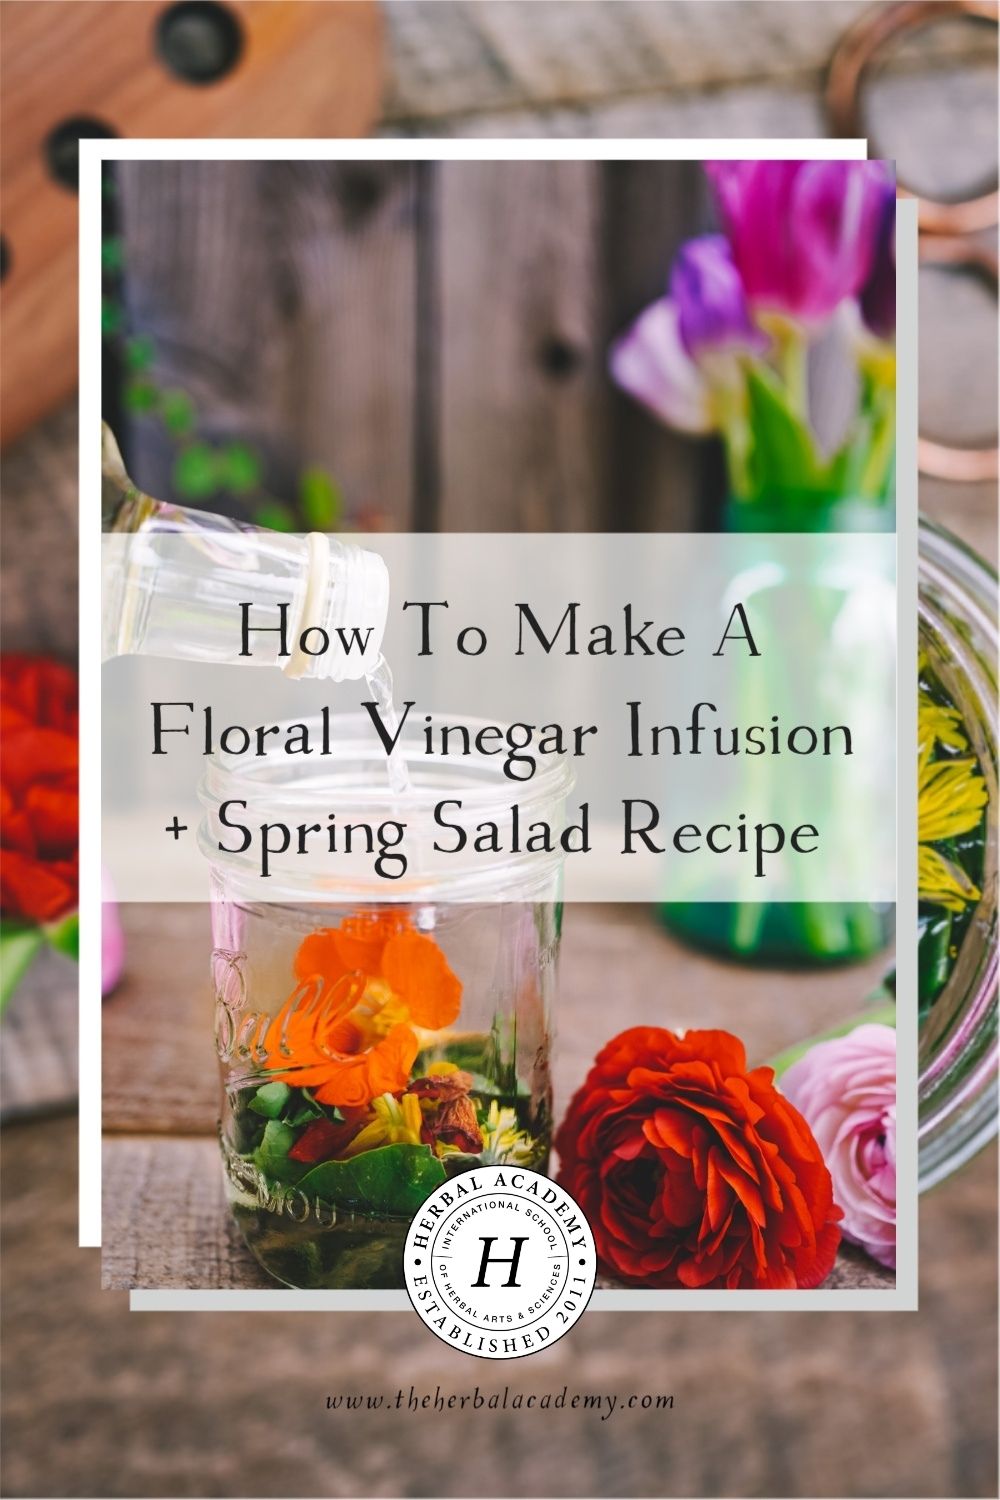 How To Make A Floral Vinegar Infusion + Spring Salad Recipe | Herbal Academy | Plucked from the ground and drizzled onto your plate, a delicious herbal vinegar infusion is a recipe you won’t want to miss out on making!